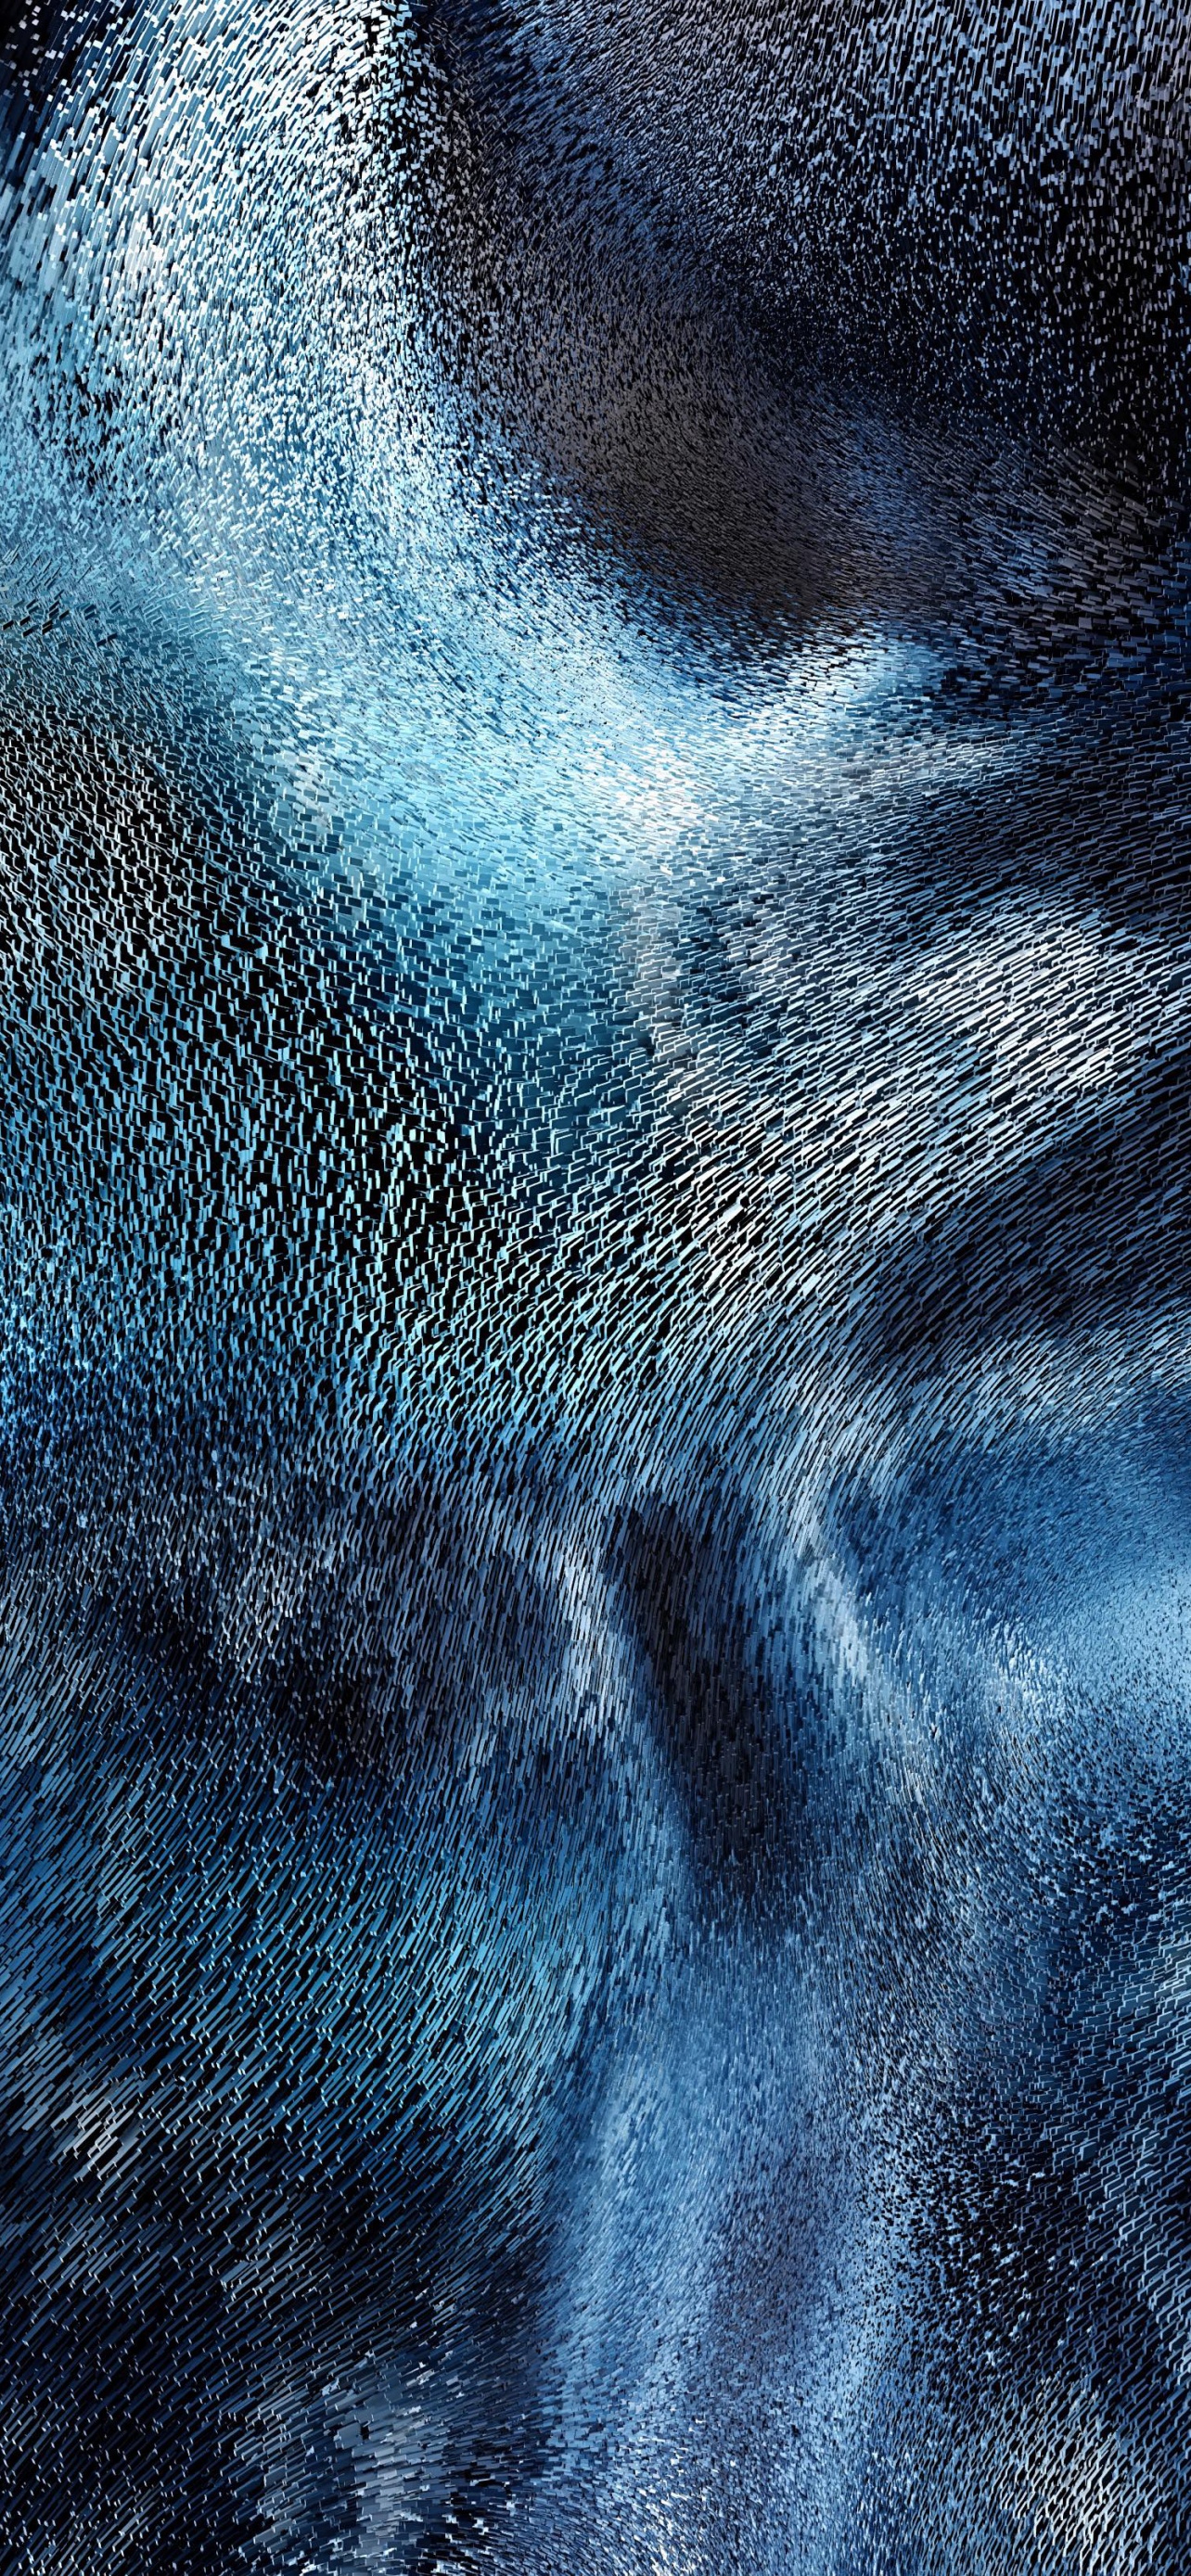 Swarm Wallpaper 4K, Particles, Blue, 5K, Abstract, #3876